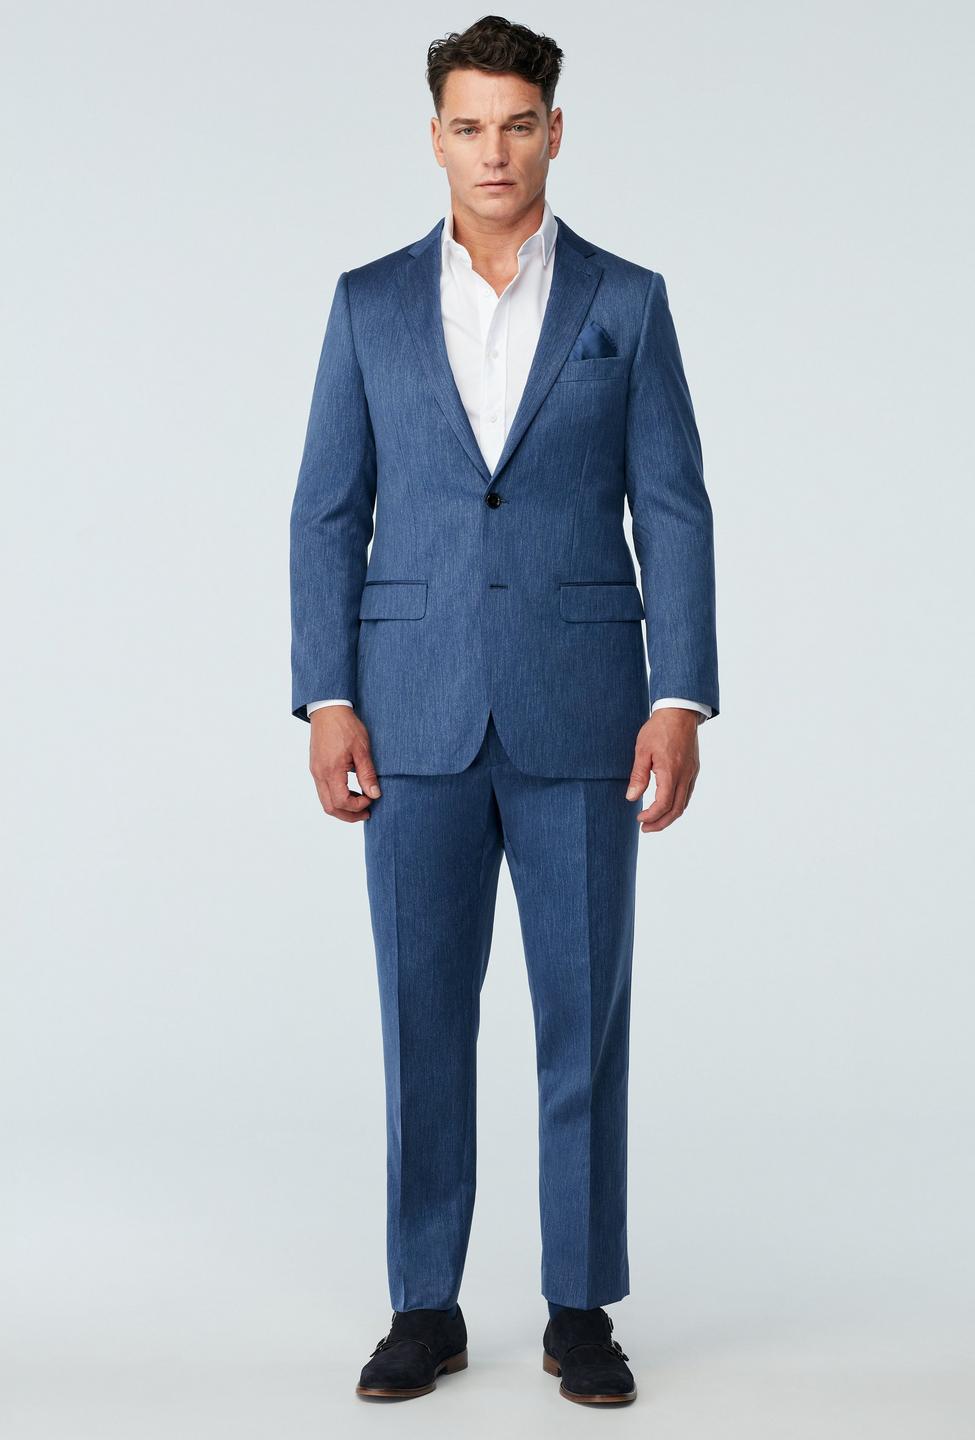 Blue suit - Solid Design from Indochino Collection